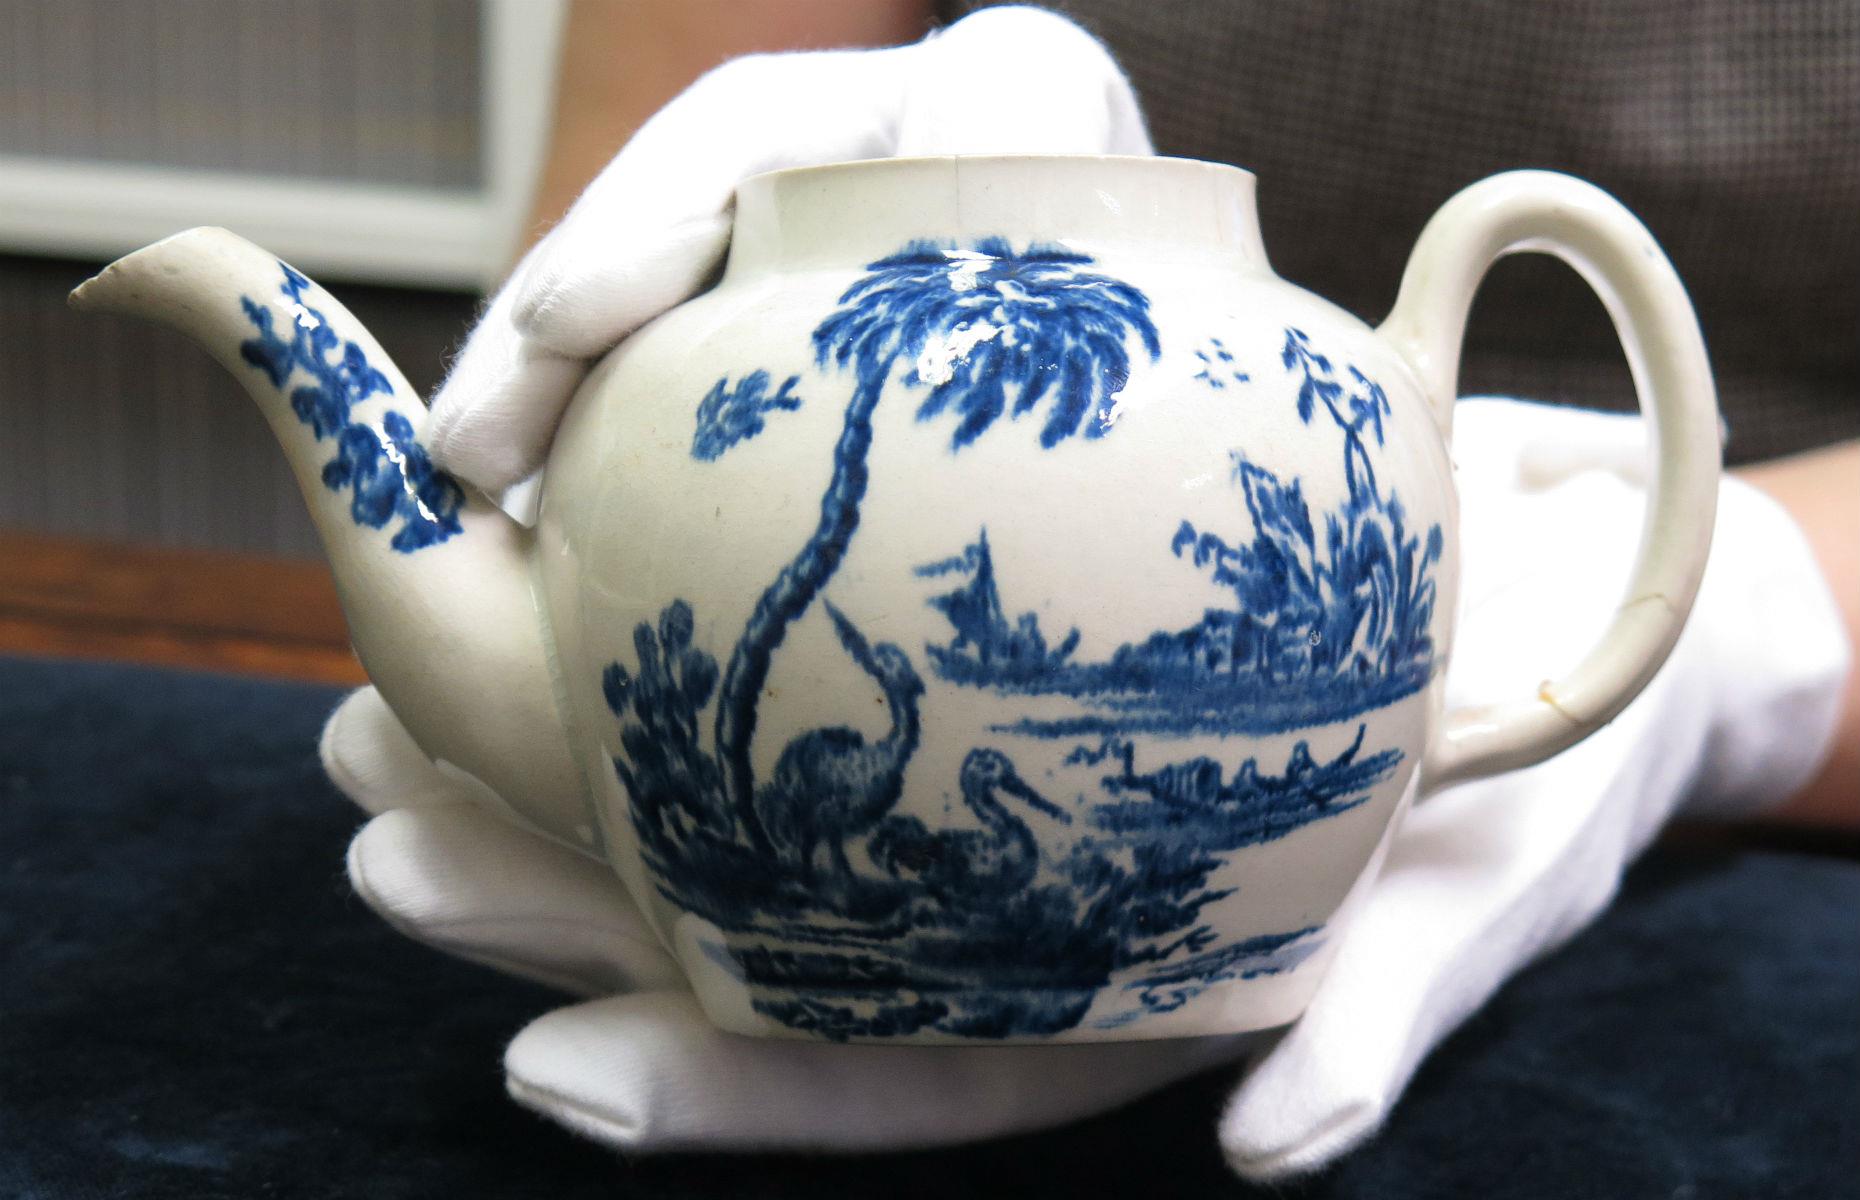 The cracked teapot with huge historical value